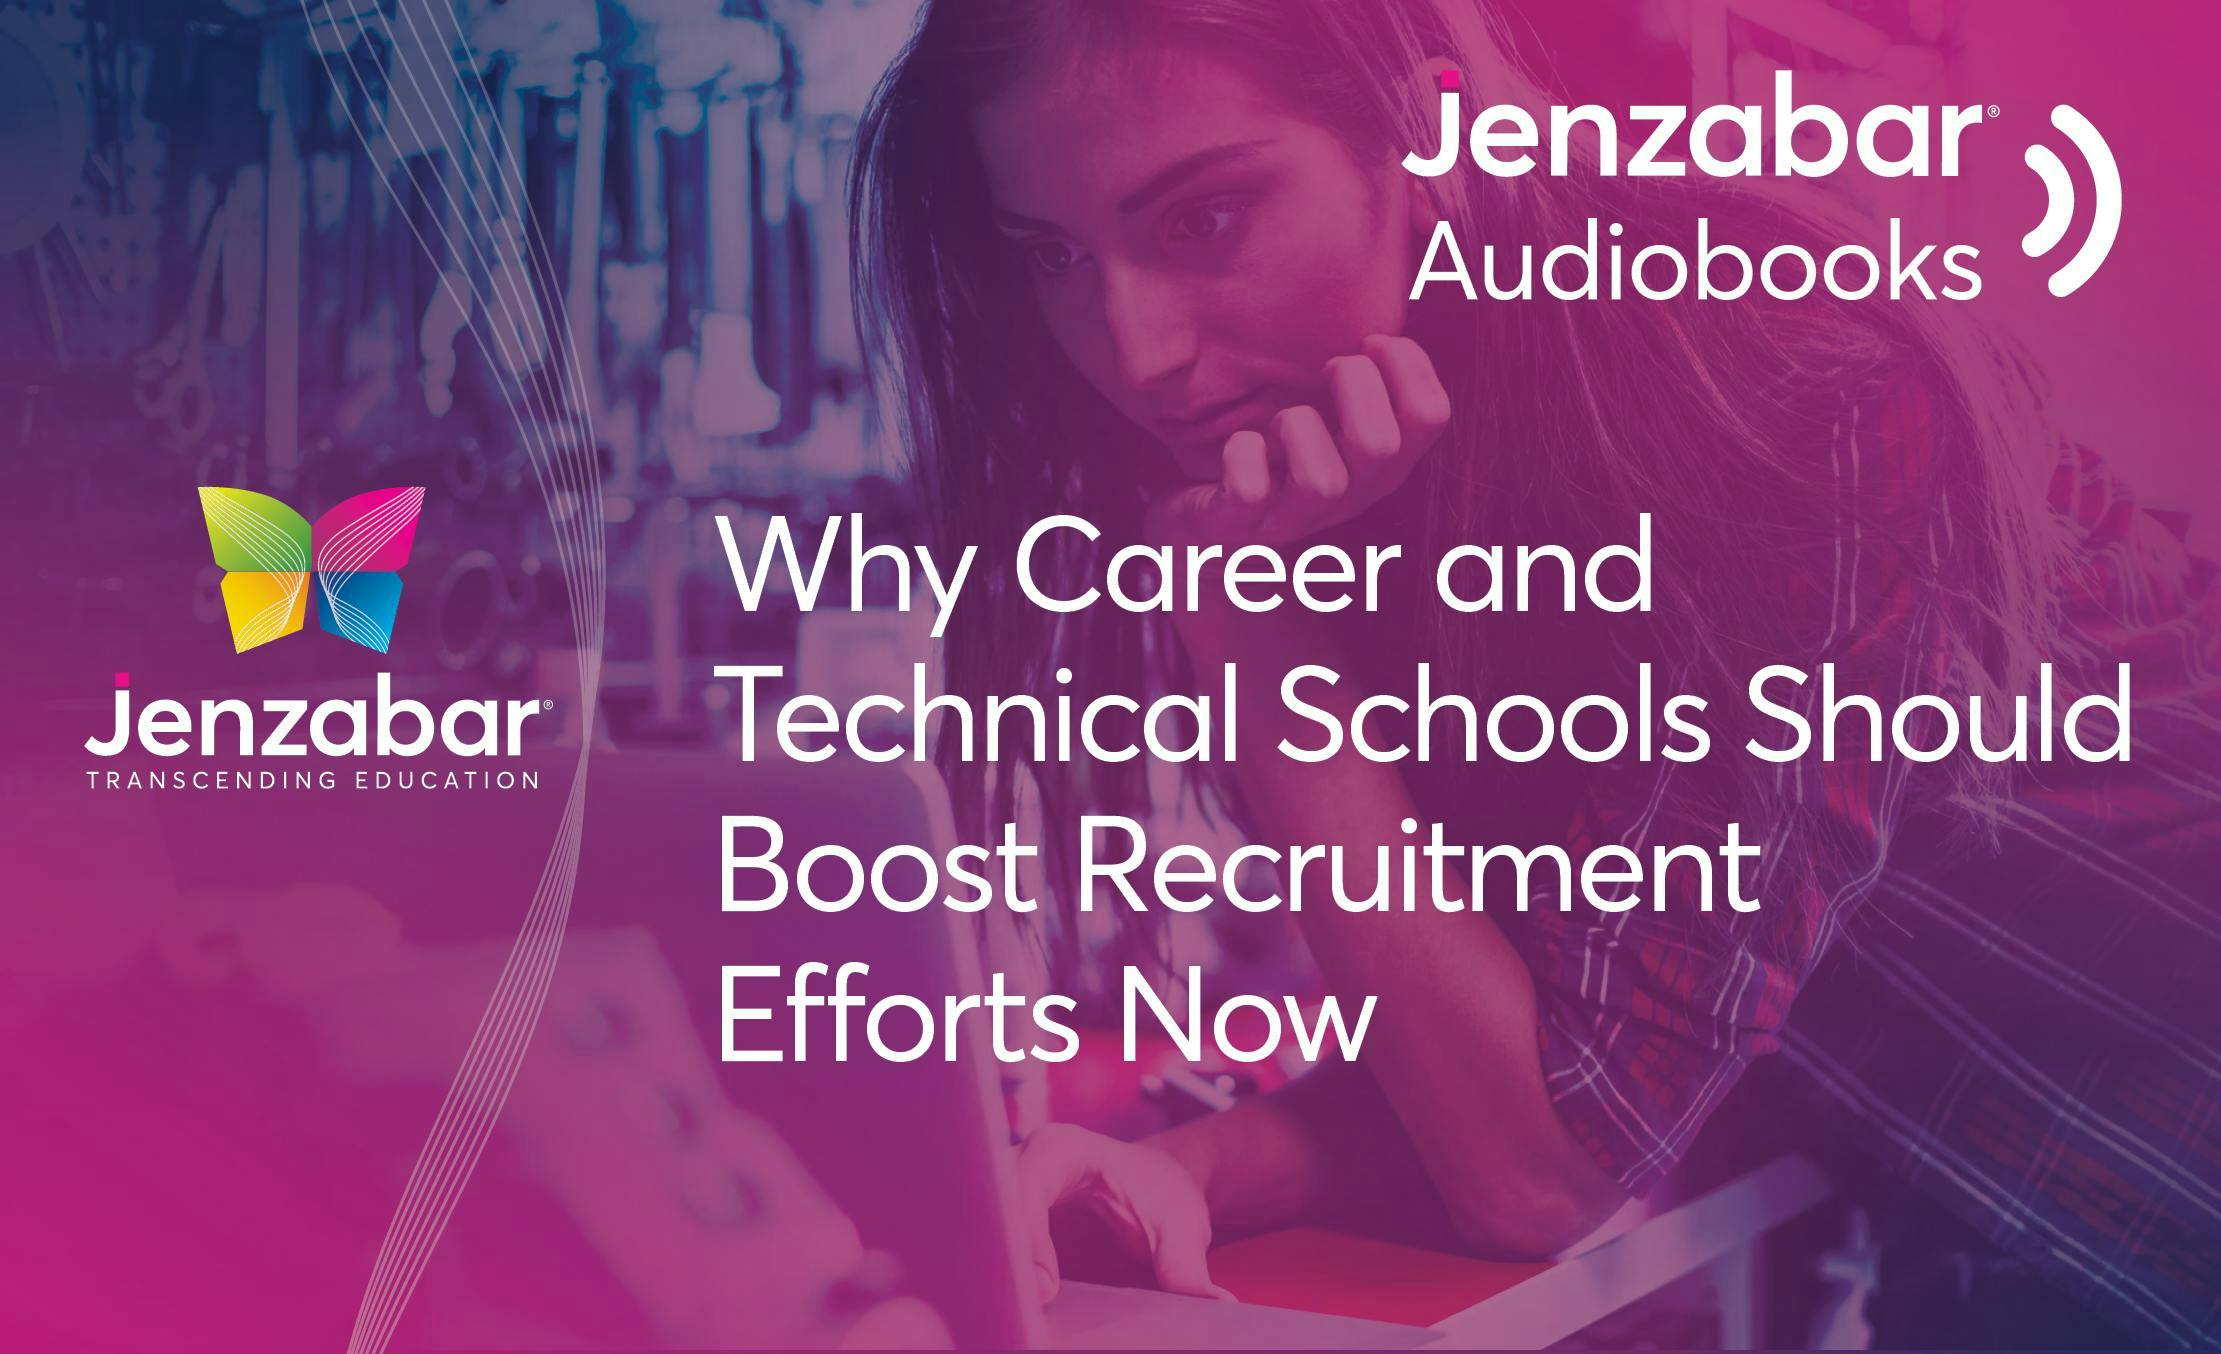 Audiobook: Why Career and Technical Schools Should Boost Recruitment Efforts Now